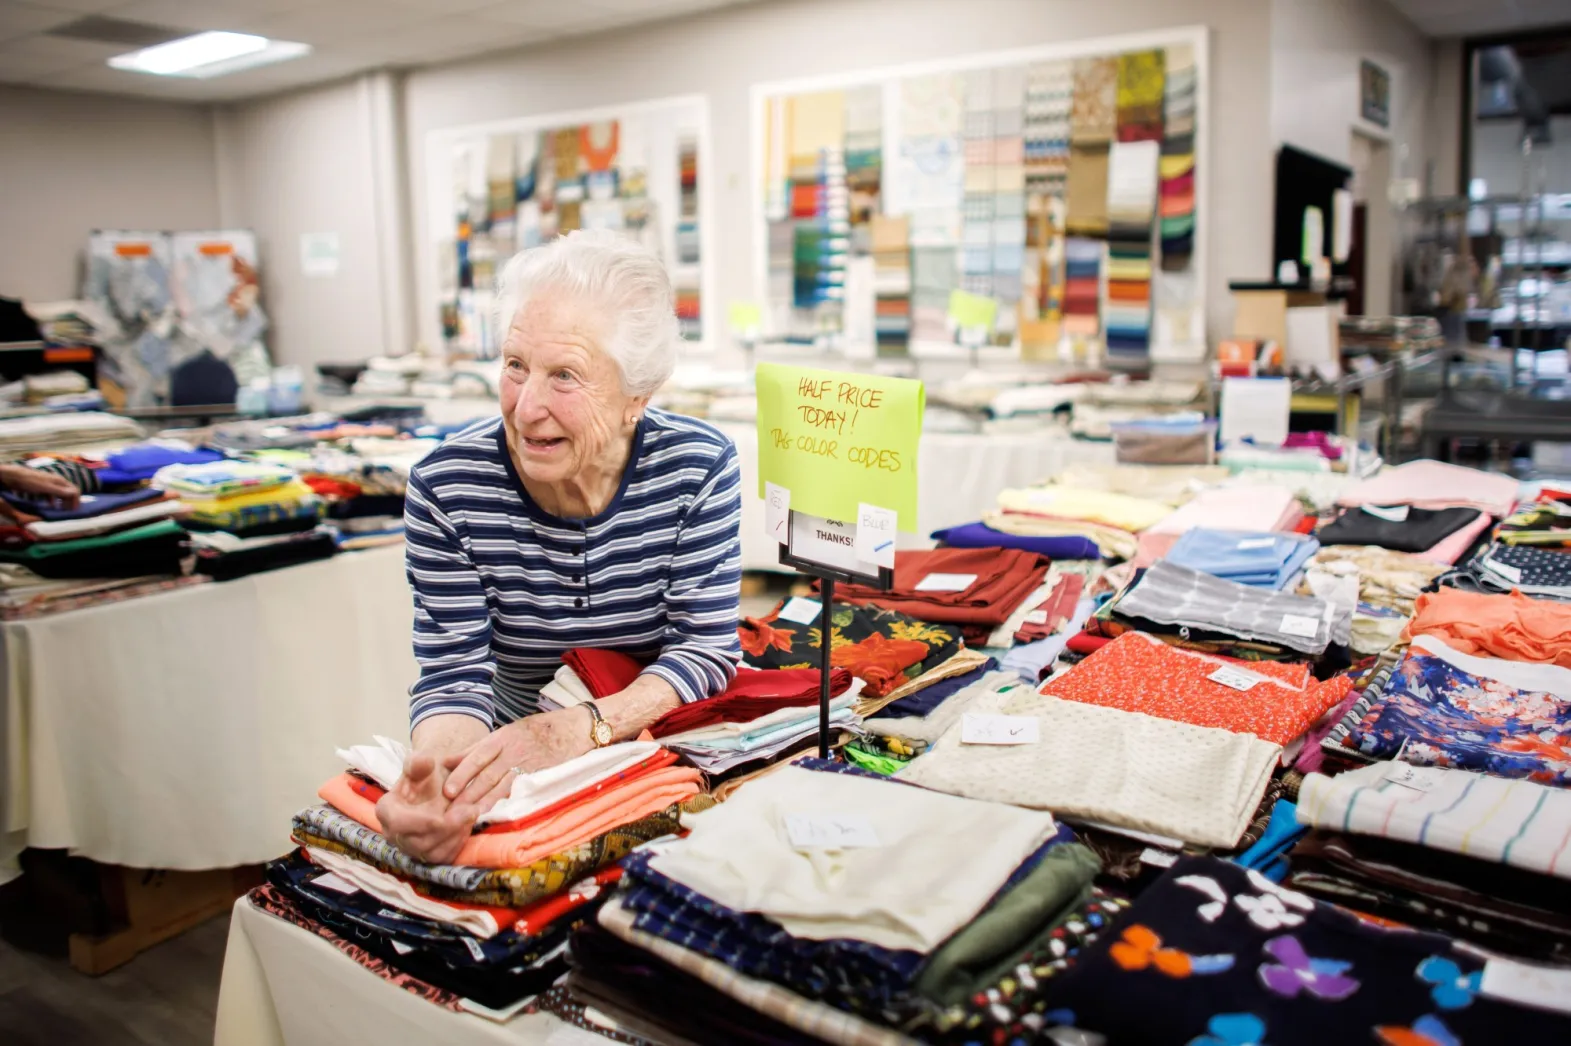 Reduce, reuse, resell: A Sunnyvale nonprofit offers surplus fabric and craft supplies at affordable prices